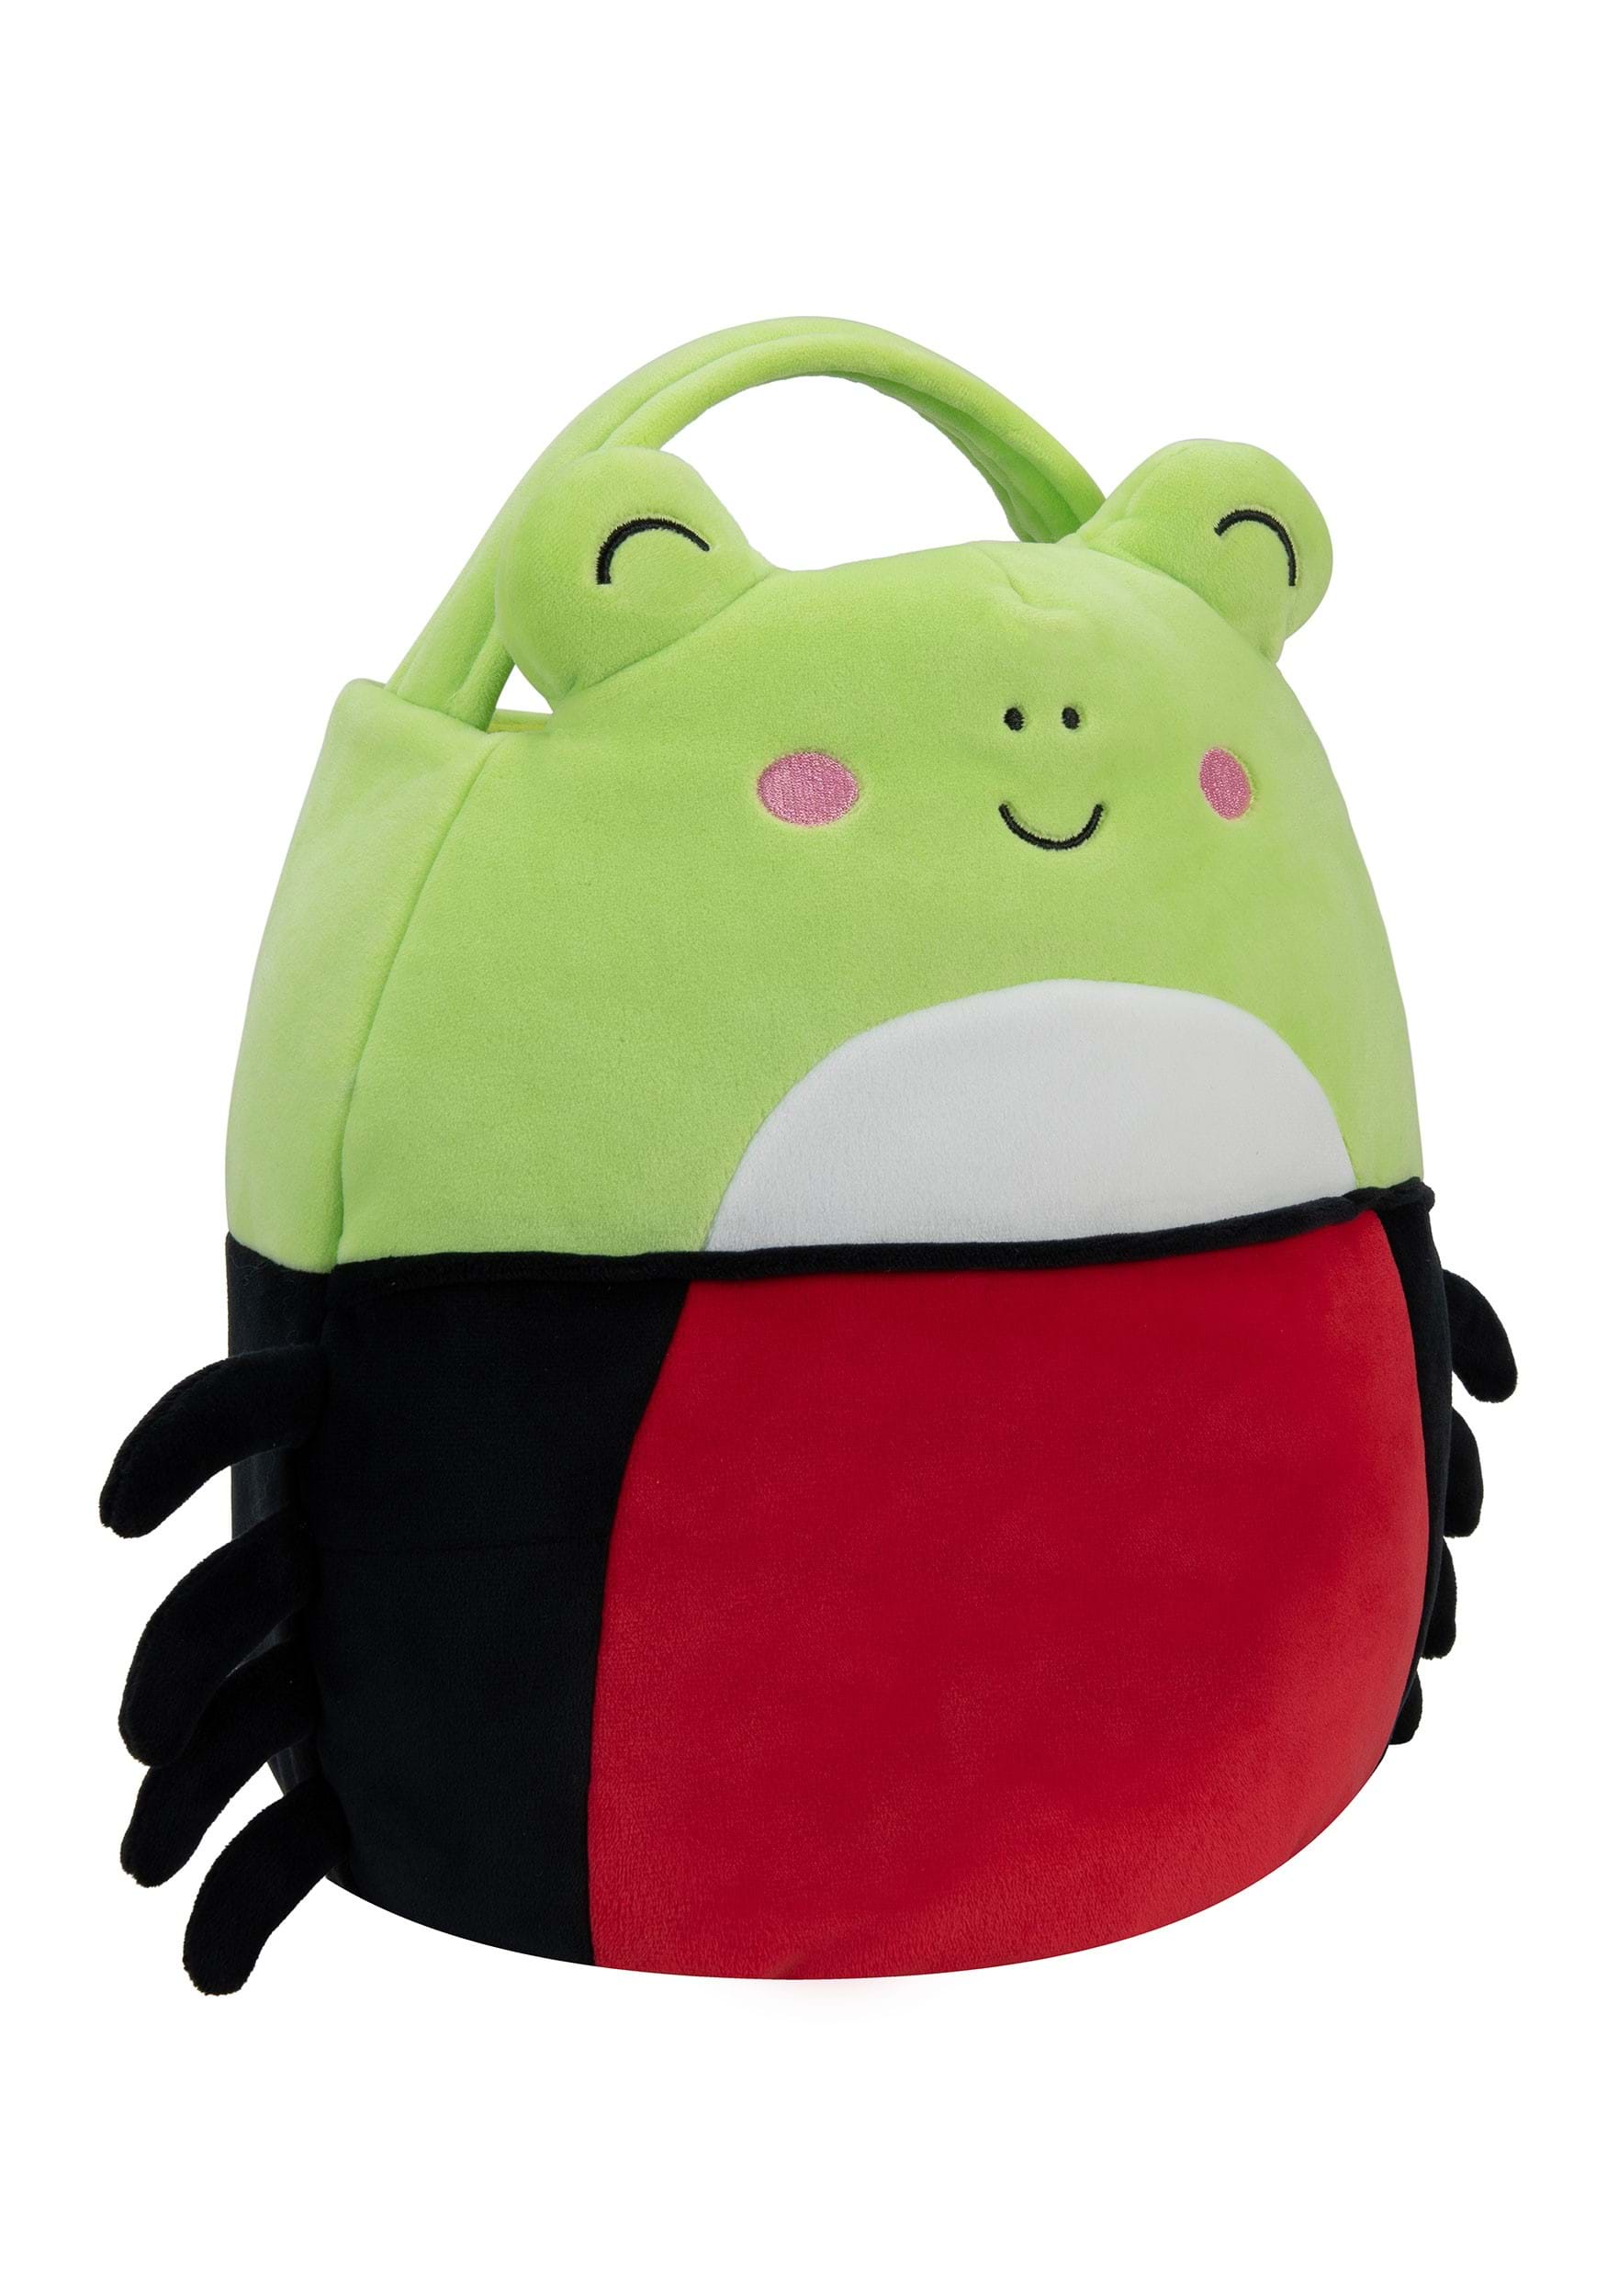 https://images.halloweencostumes.com/products/93037/1-1/squishmallows-wendy-the-spider-frog-treat-bag.jpg